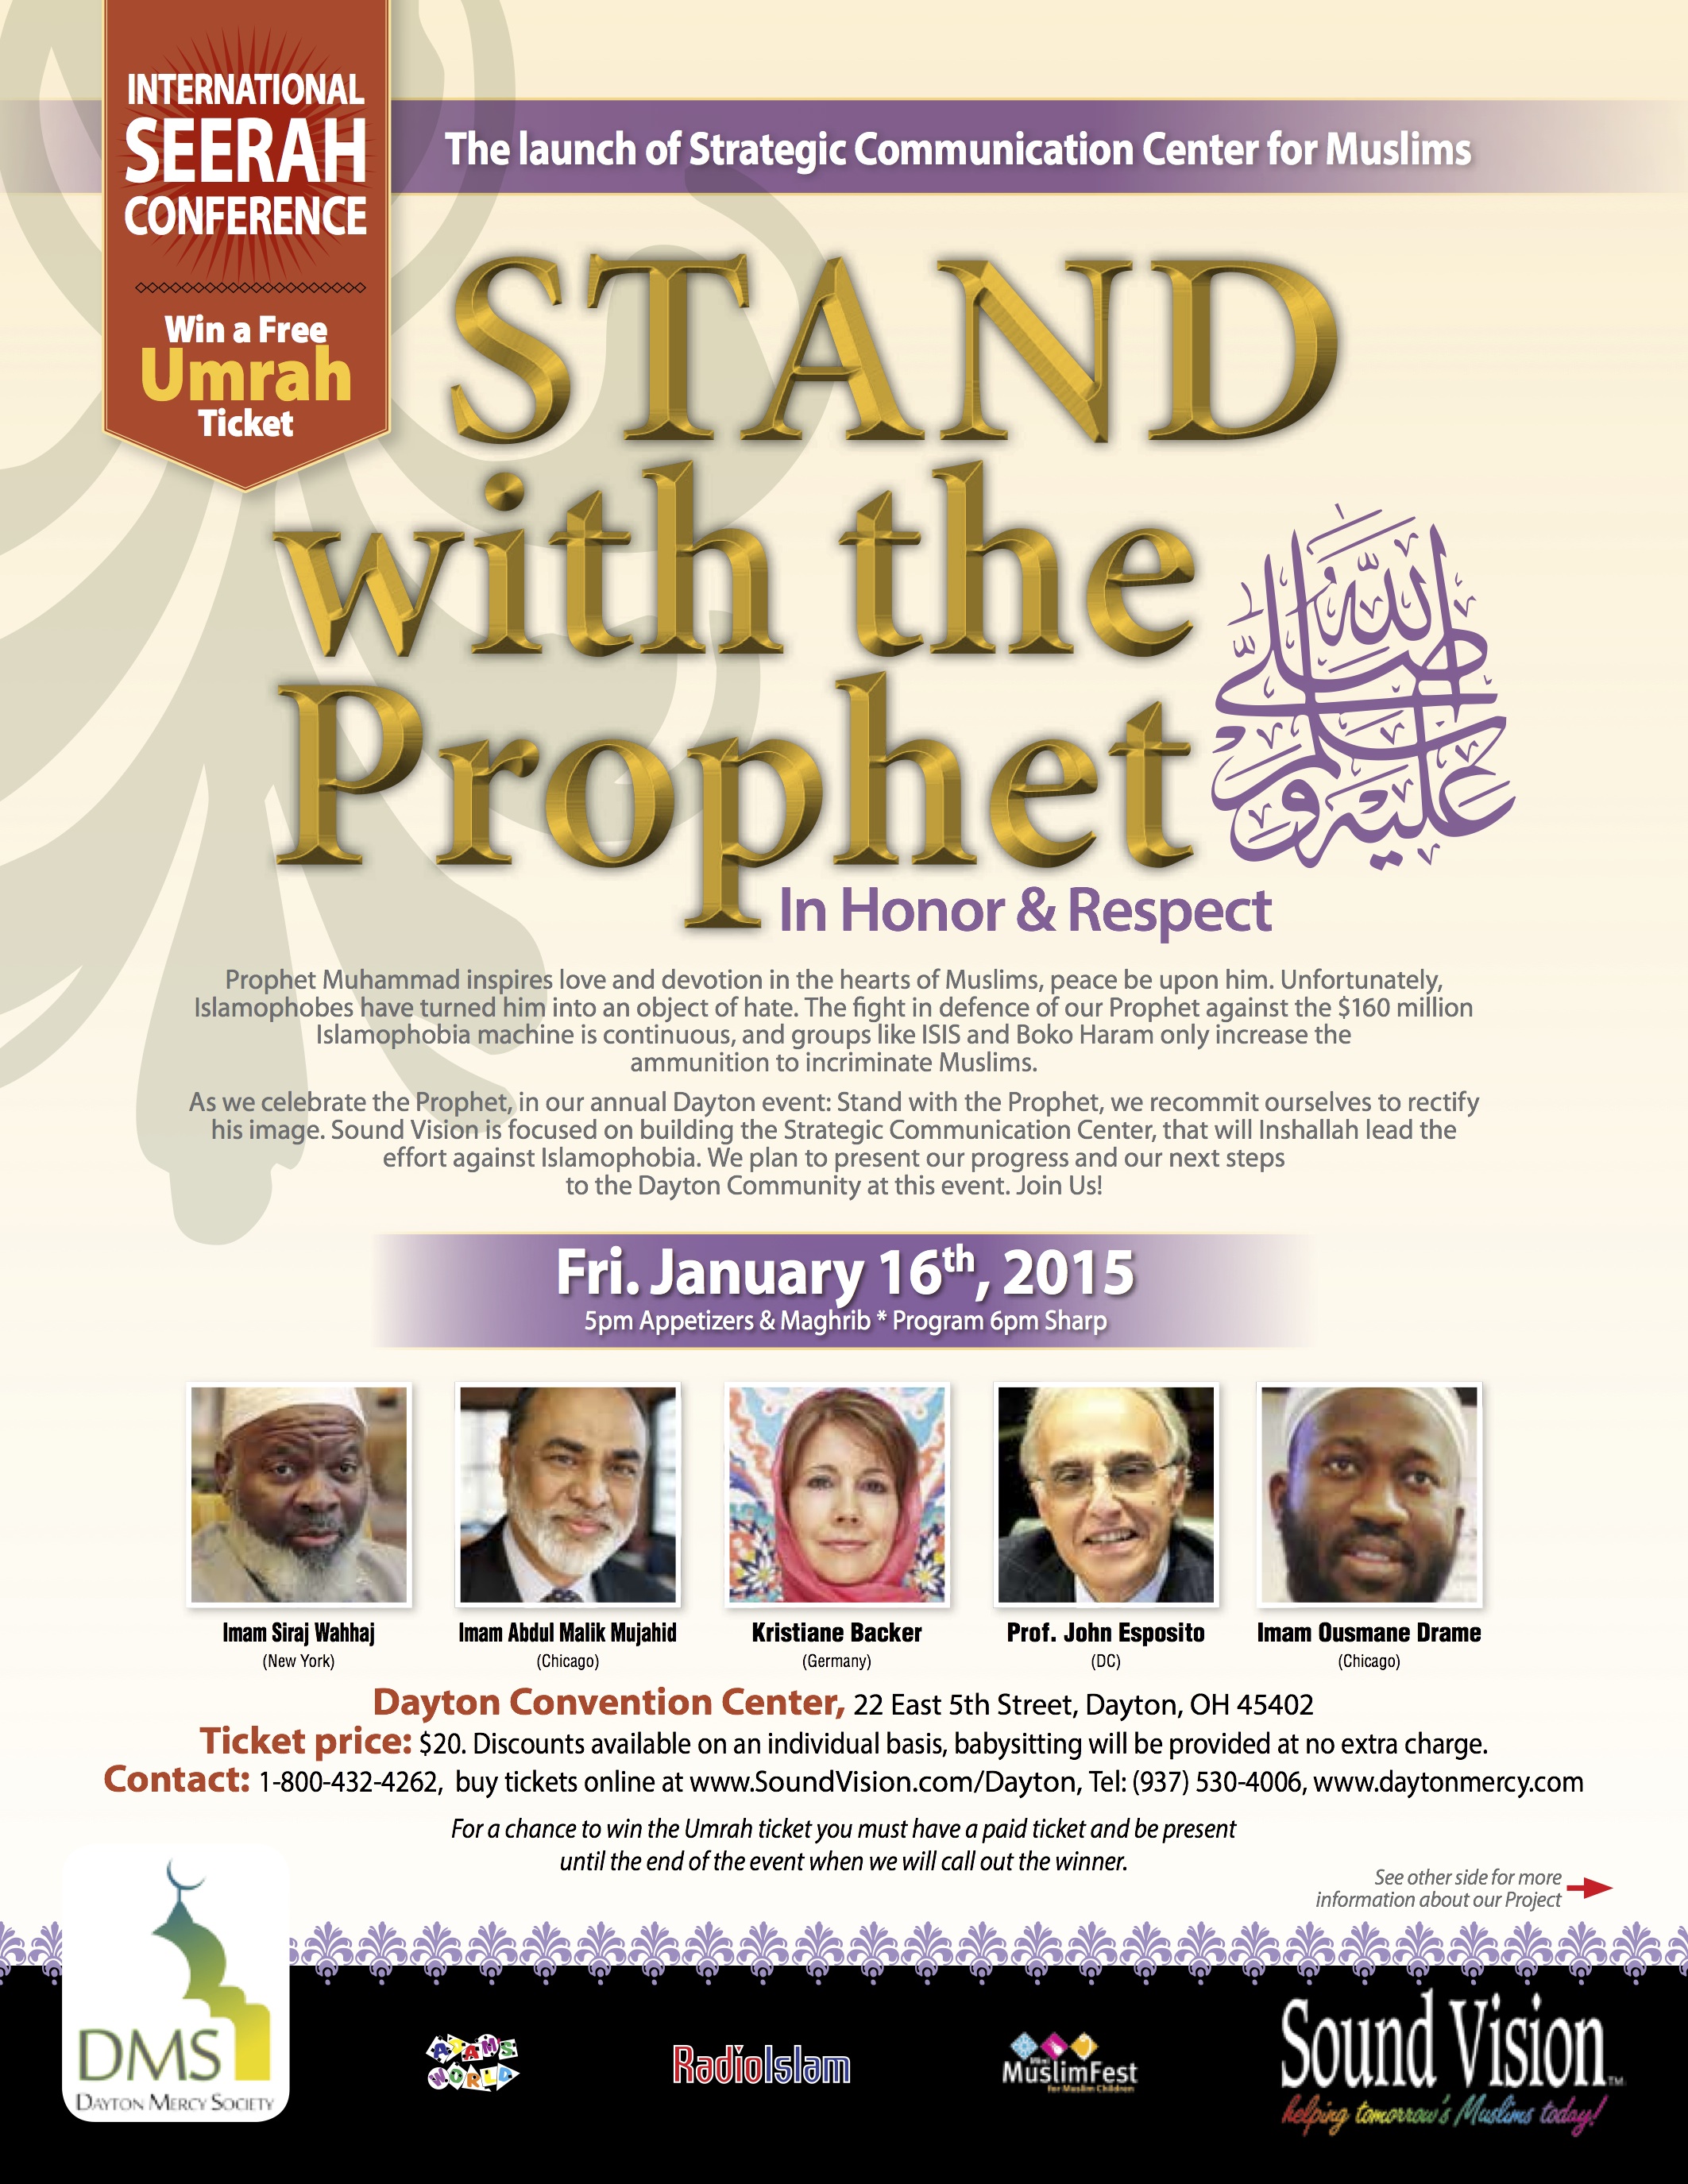 Stand with the Prophet in Honor and Respect